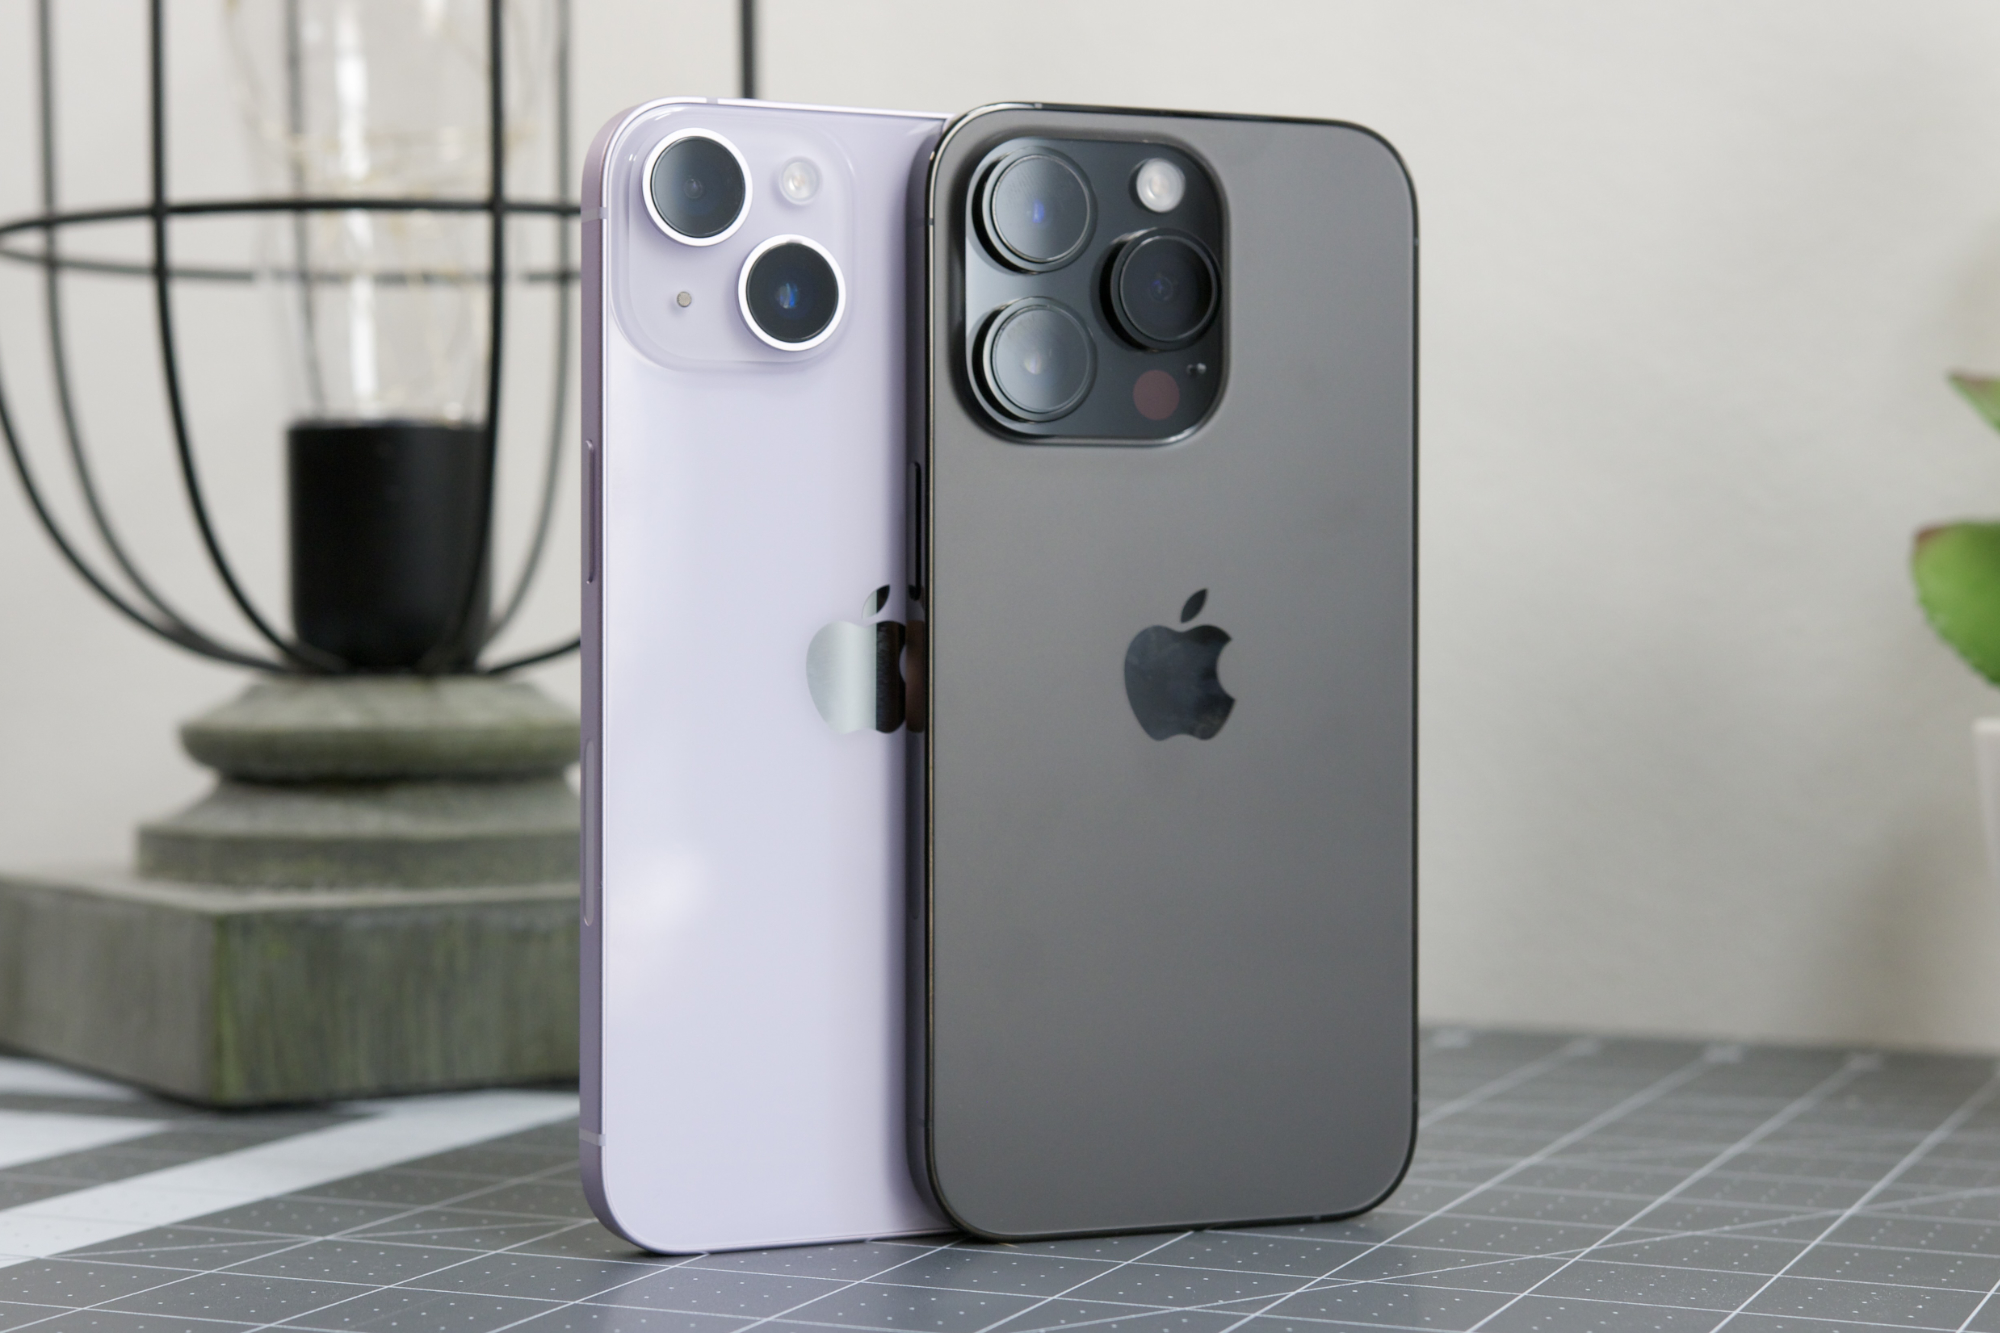 Our iPhone 14 Pro vs. iPhone 14 camera test is a tough one